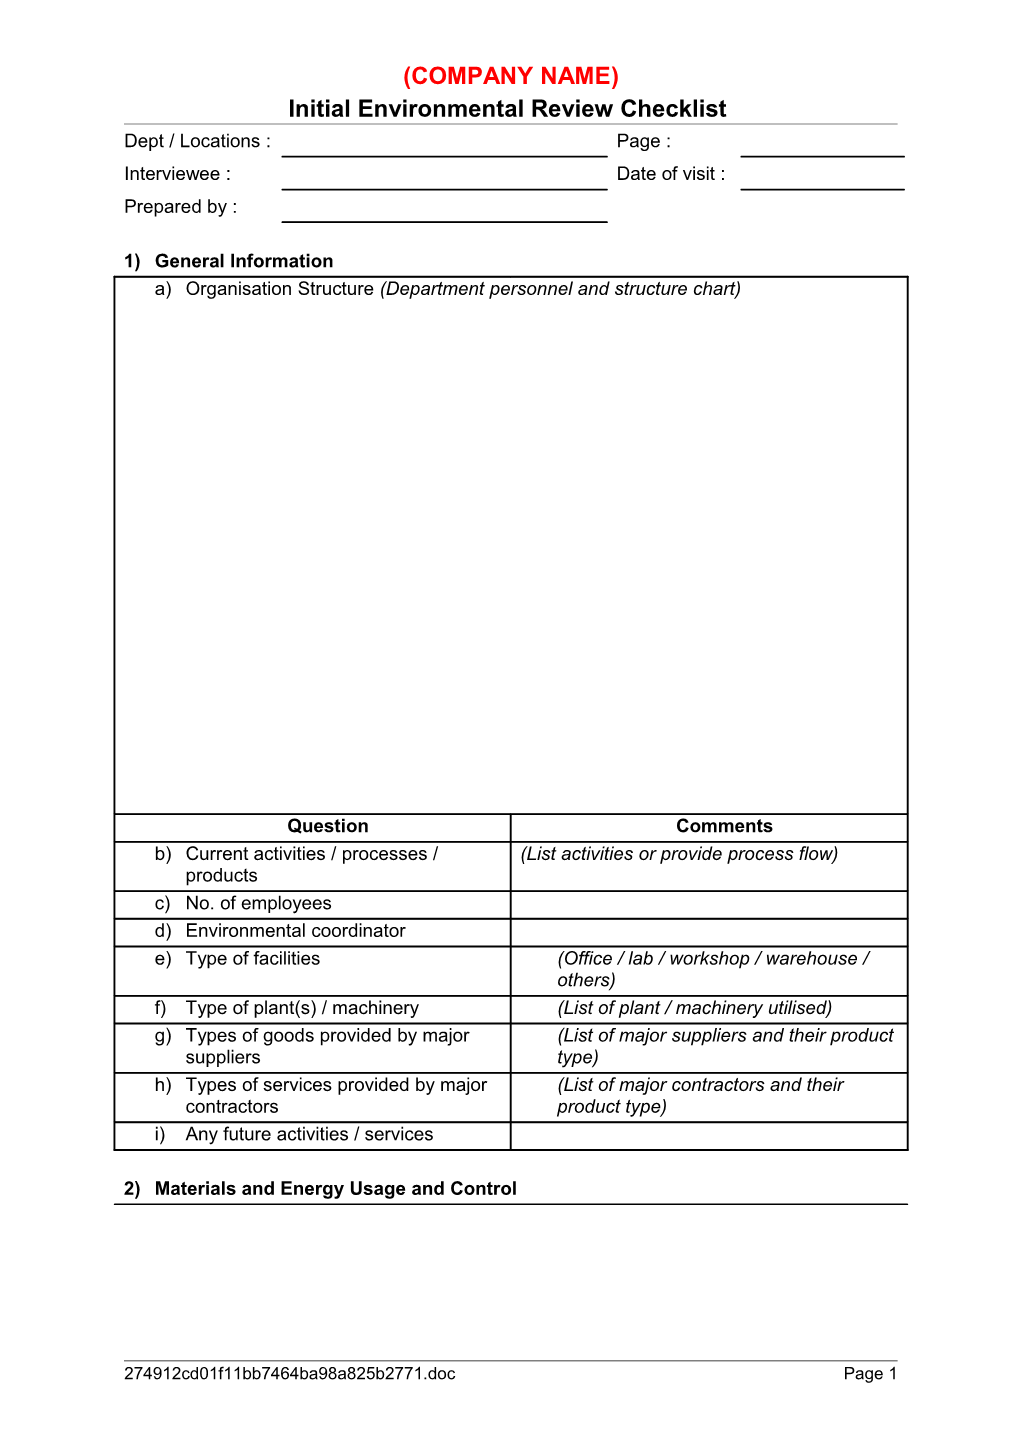 Initial Environmental Review Checklist Company General Information